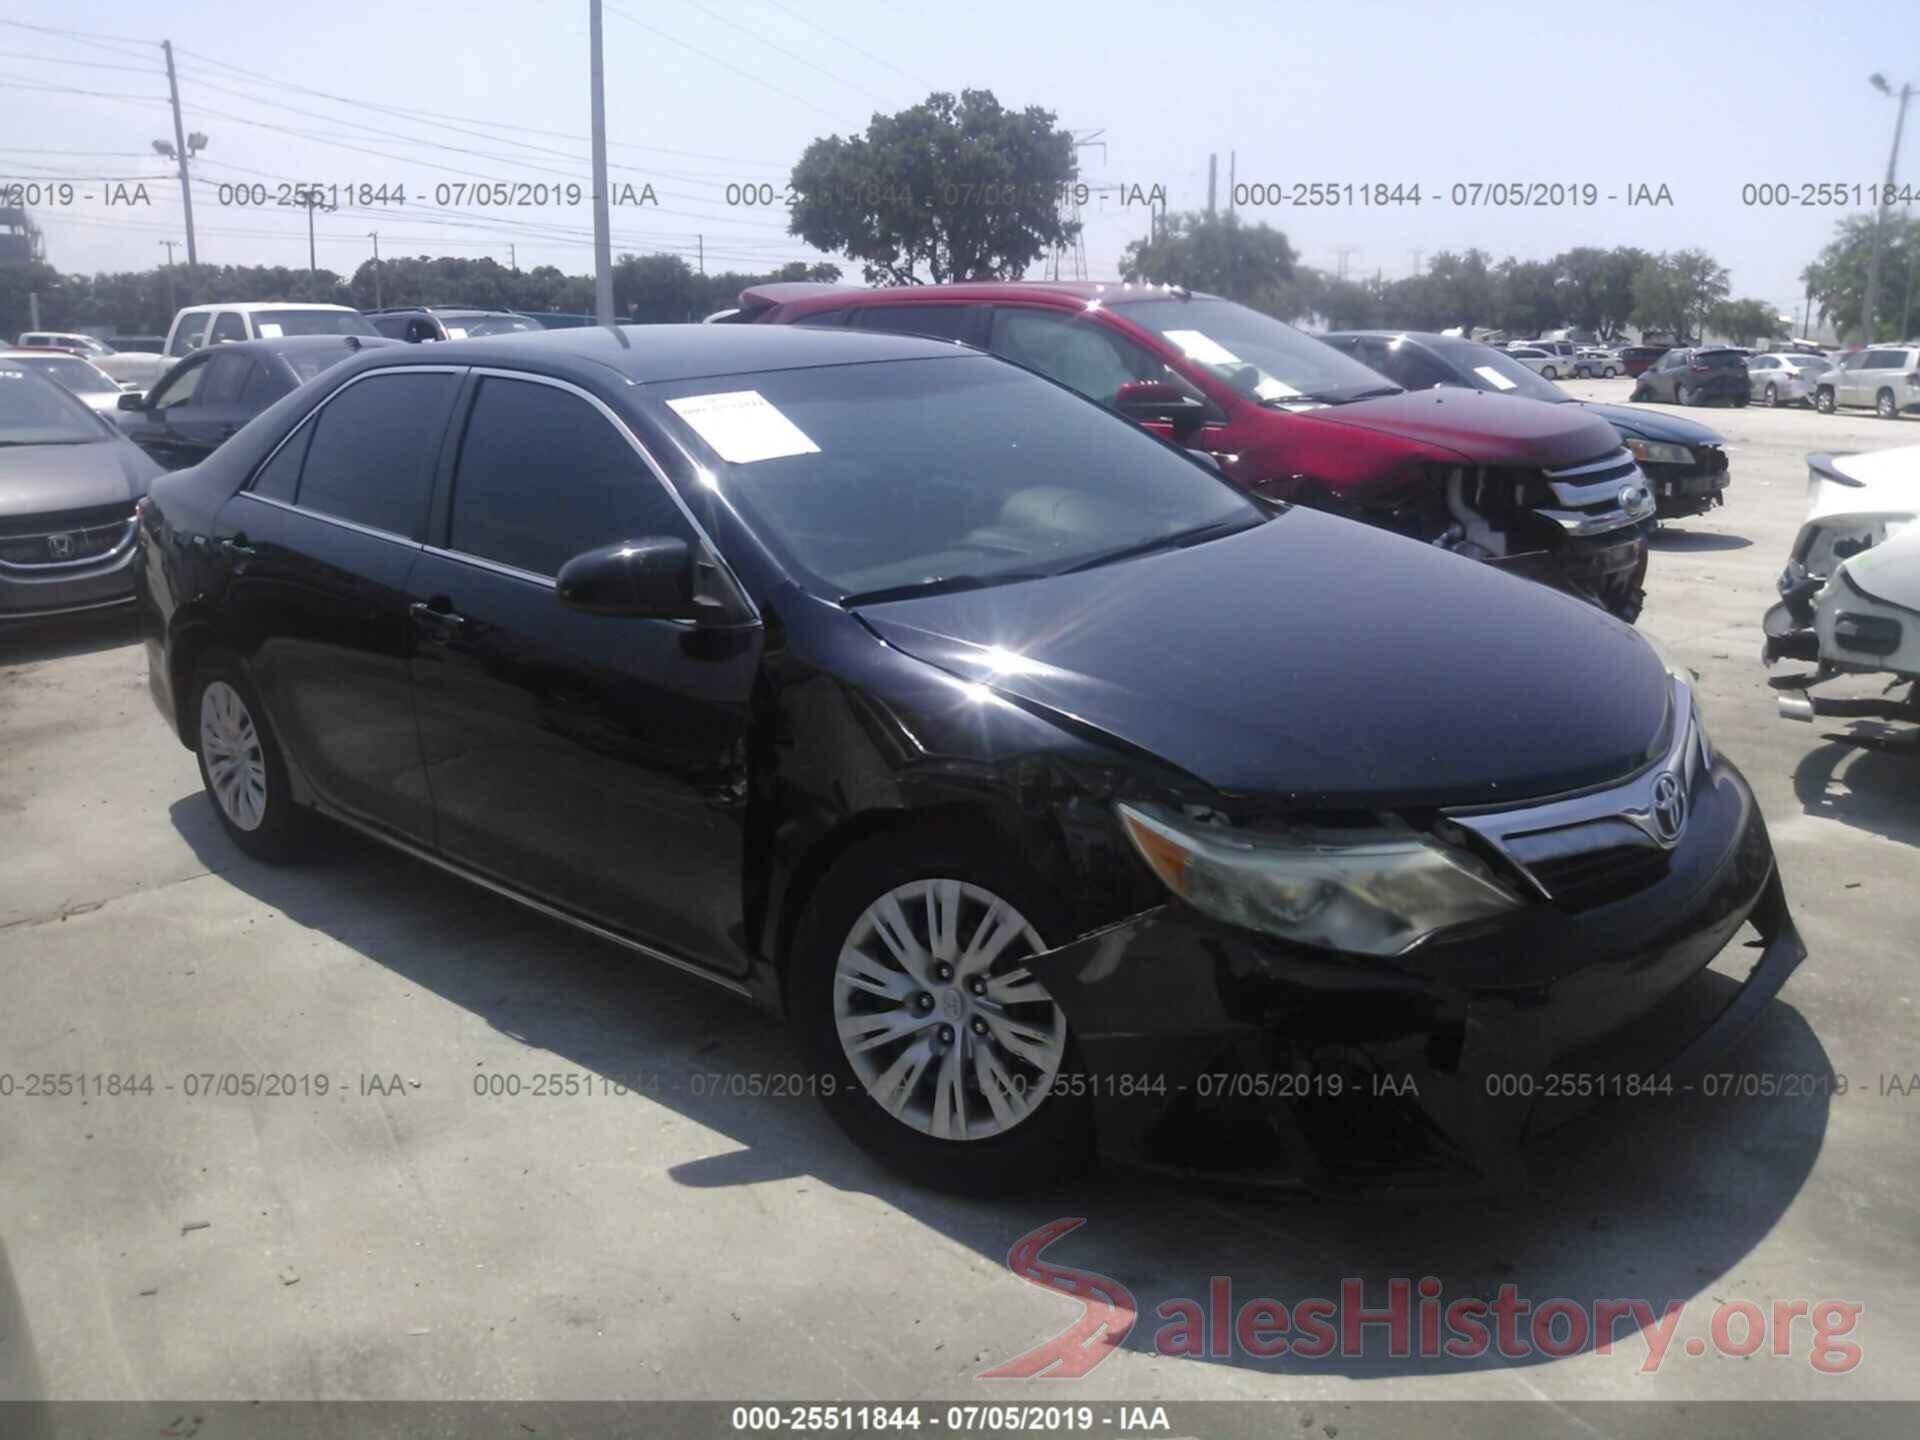 4T4BF1FKXDR326460 2013 TOYOTA CAMRY